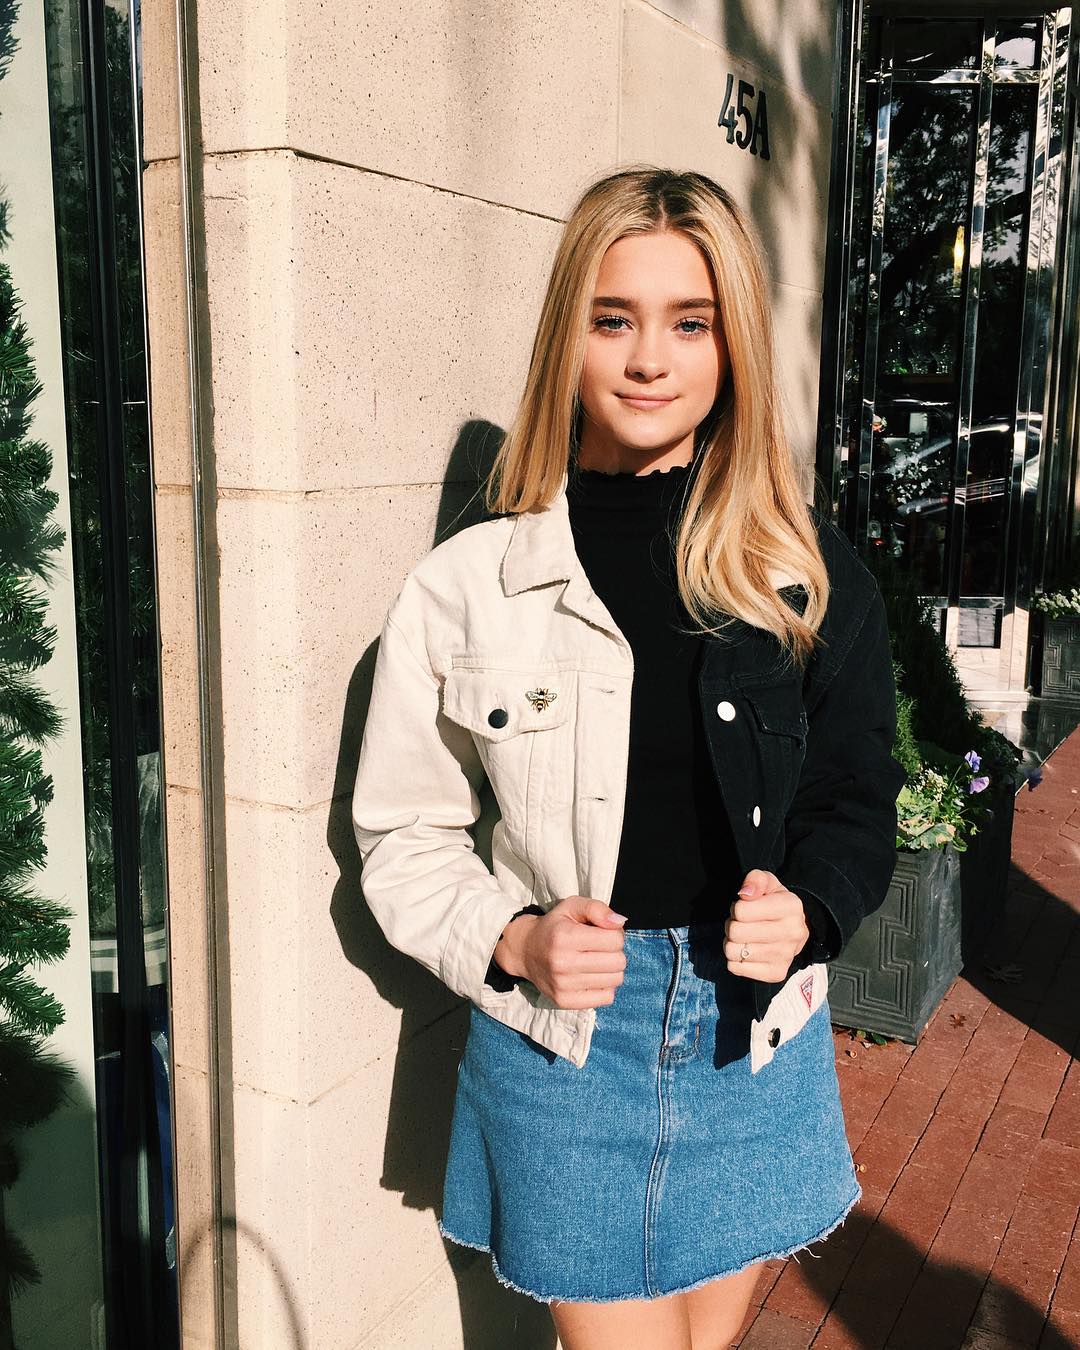 Picture of Lizzy Greene